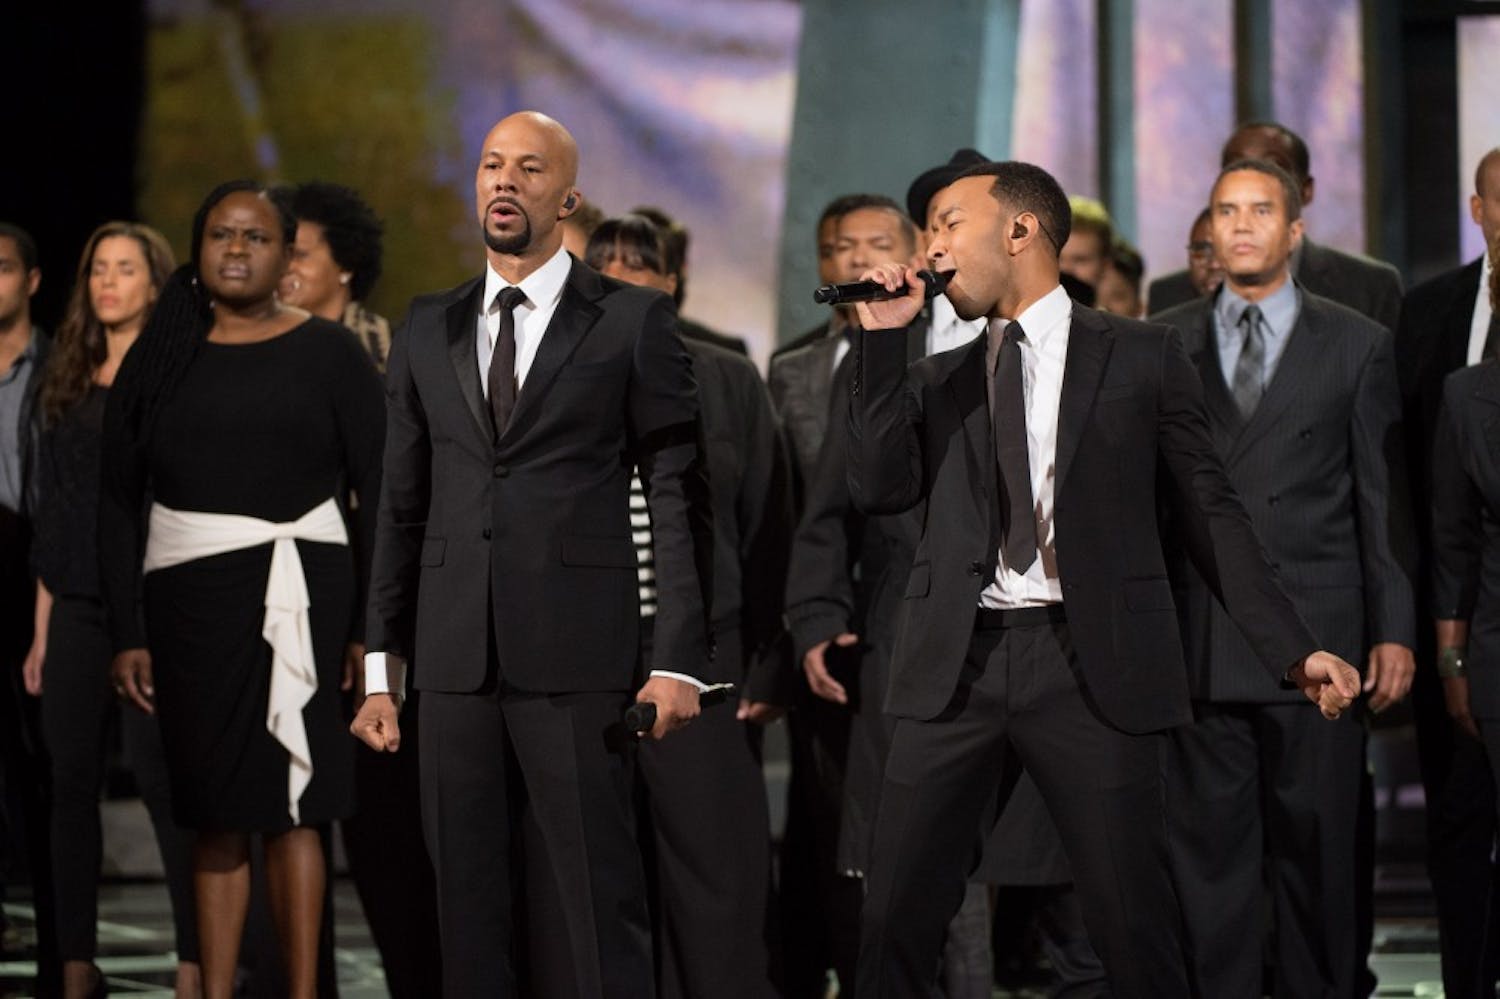 Lonnie Lynn (Common) and John Legend perform with the Oscar® nominated Original Song,  “Glory” from the film "Selma" during the live ABC Telecast of The 87th Oscars® at the Dolby® Theatre in Hollywood, CA on Sunday, February 22, 2015.